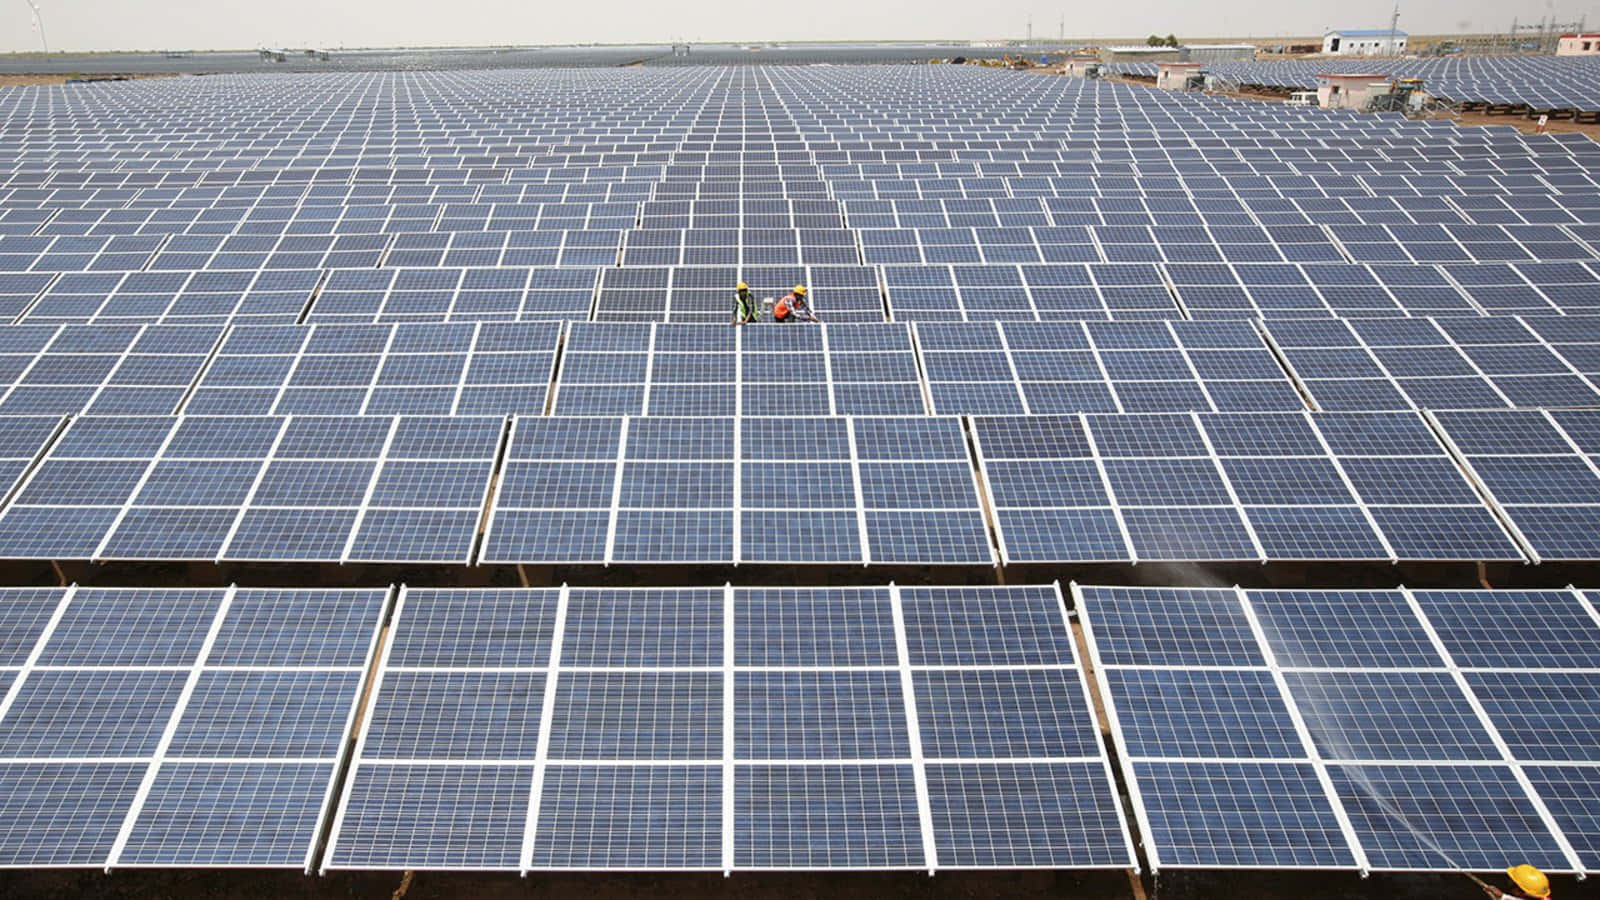 Photovoltaic Solar Panels At The Gujarat Solar Park Picture